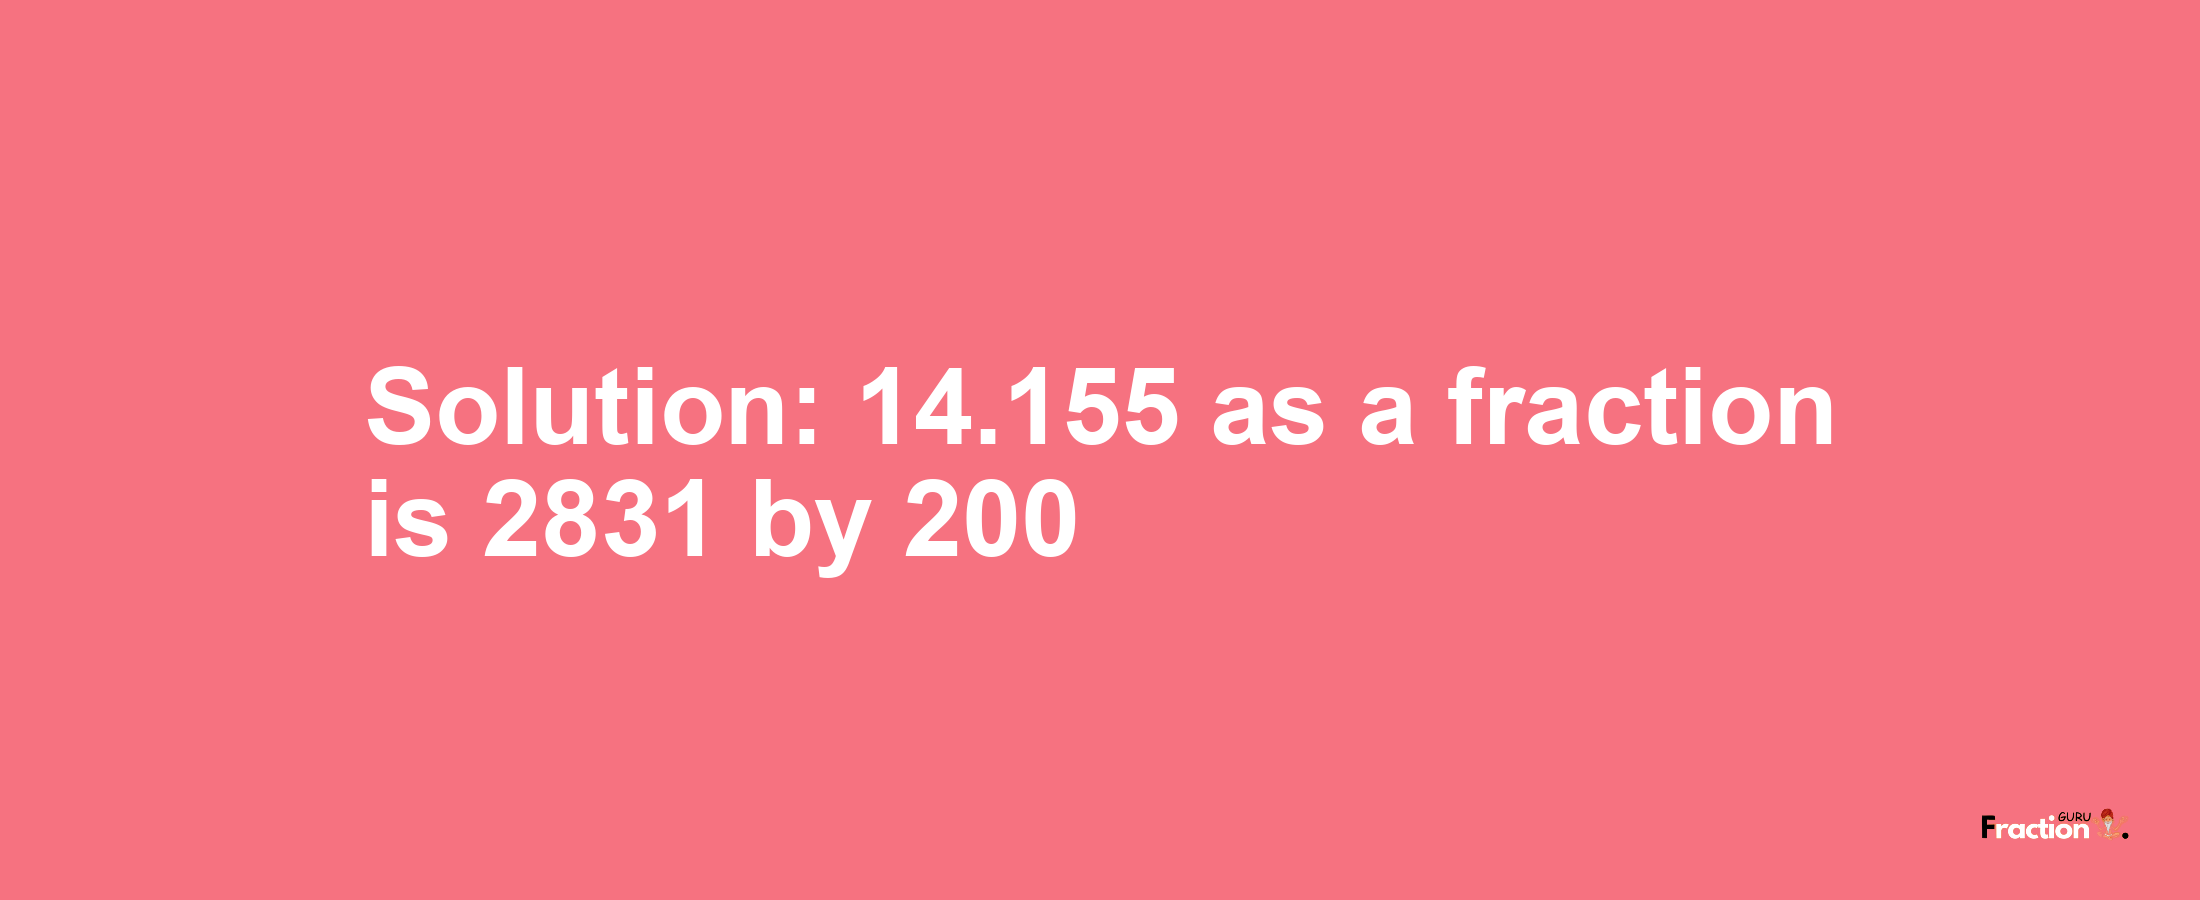 Solution:14.155 as a fraction is 2831/200